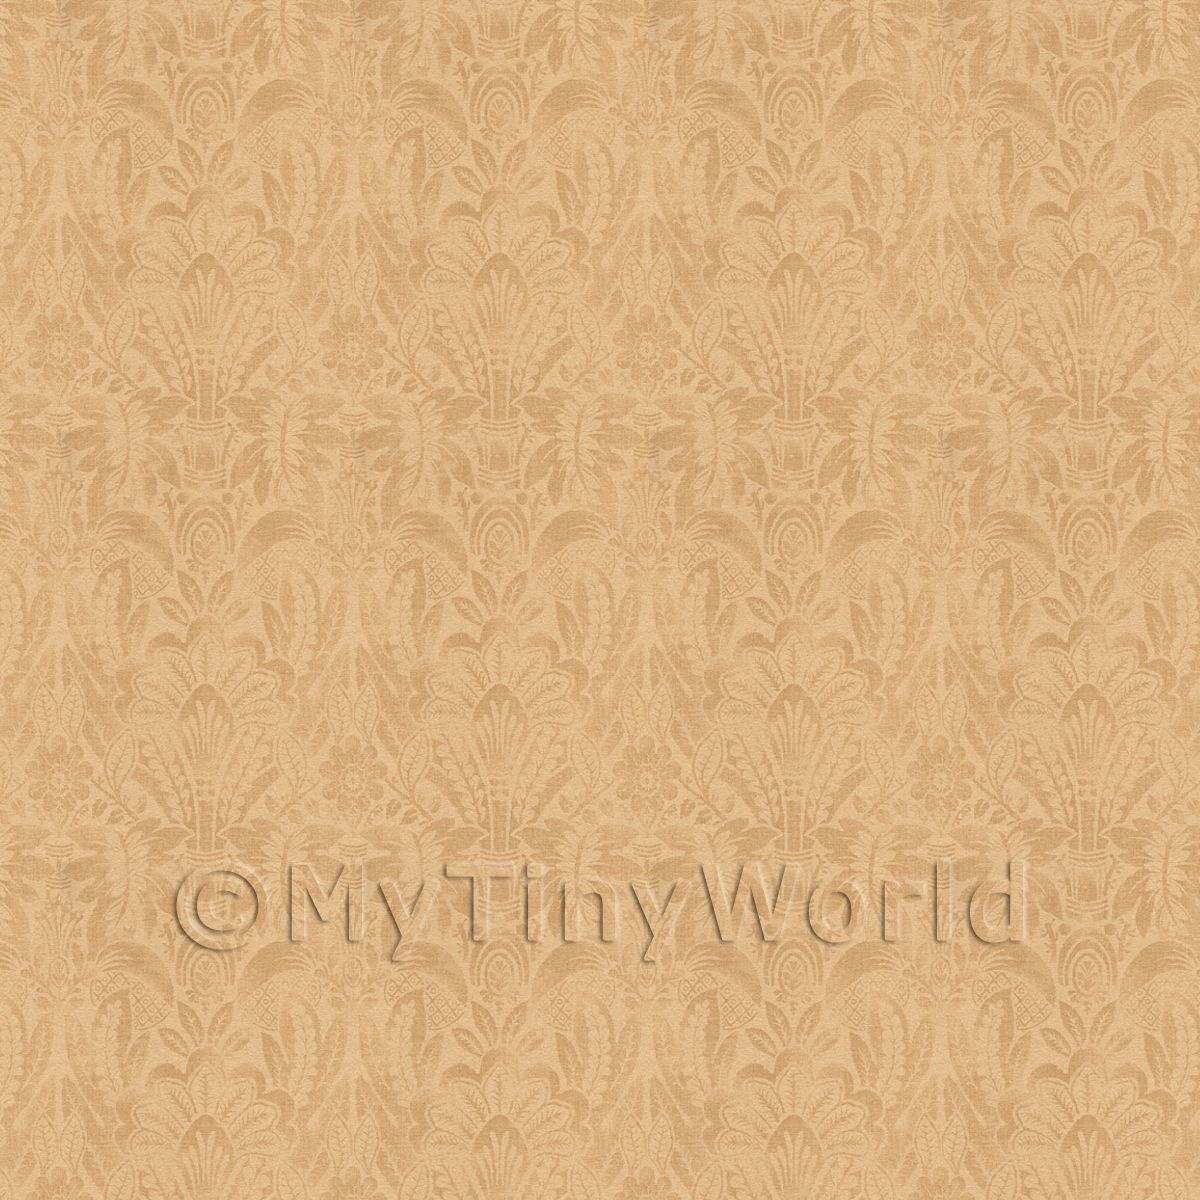 Dolls House Miniature Intricate Pale Gold On Brown Wallpaper 